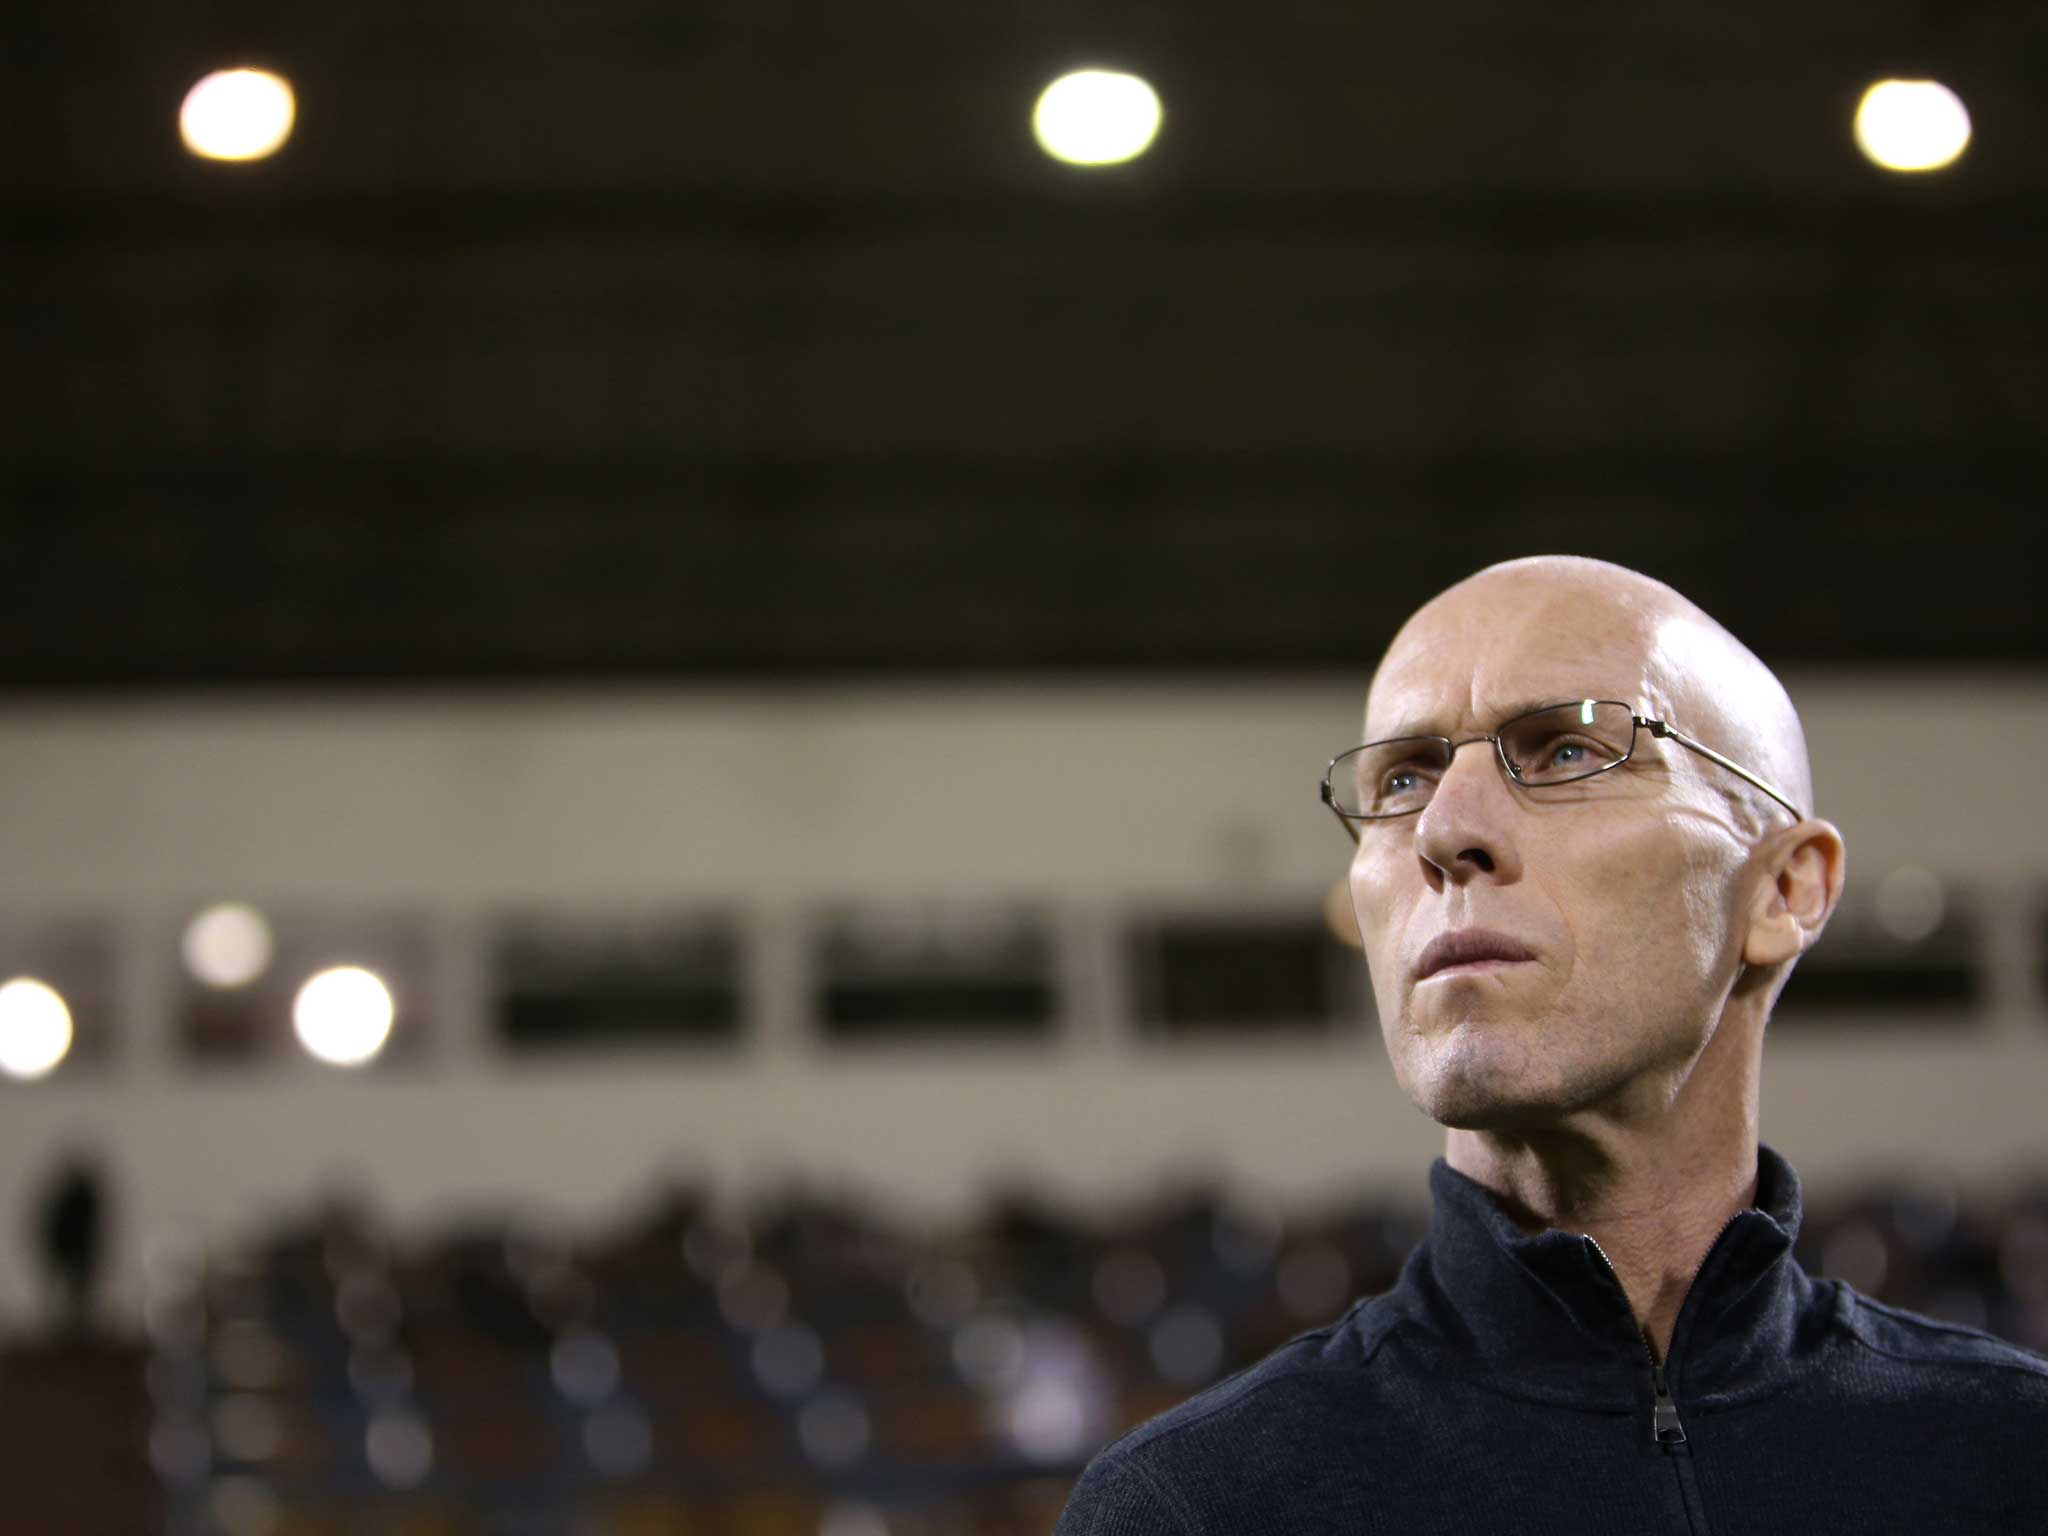 Bob Bradley is the first American to manage in the Premier League